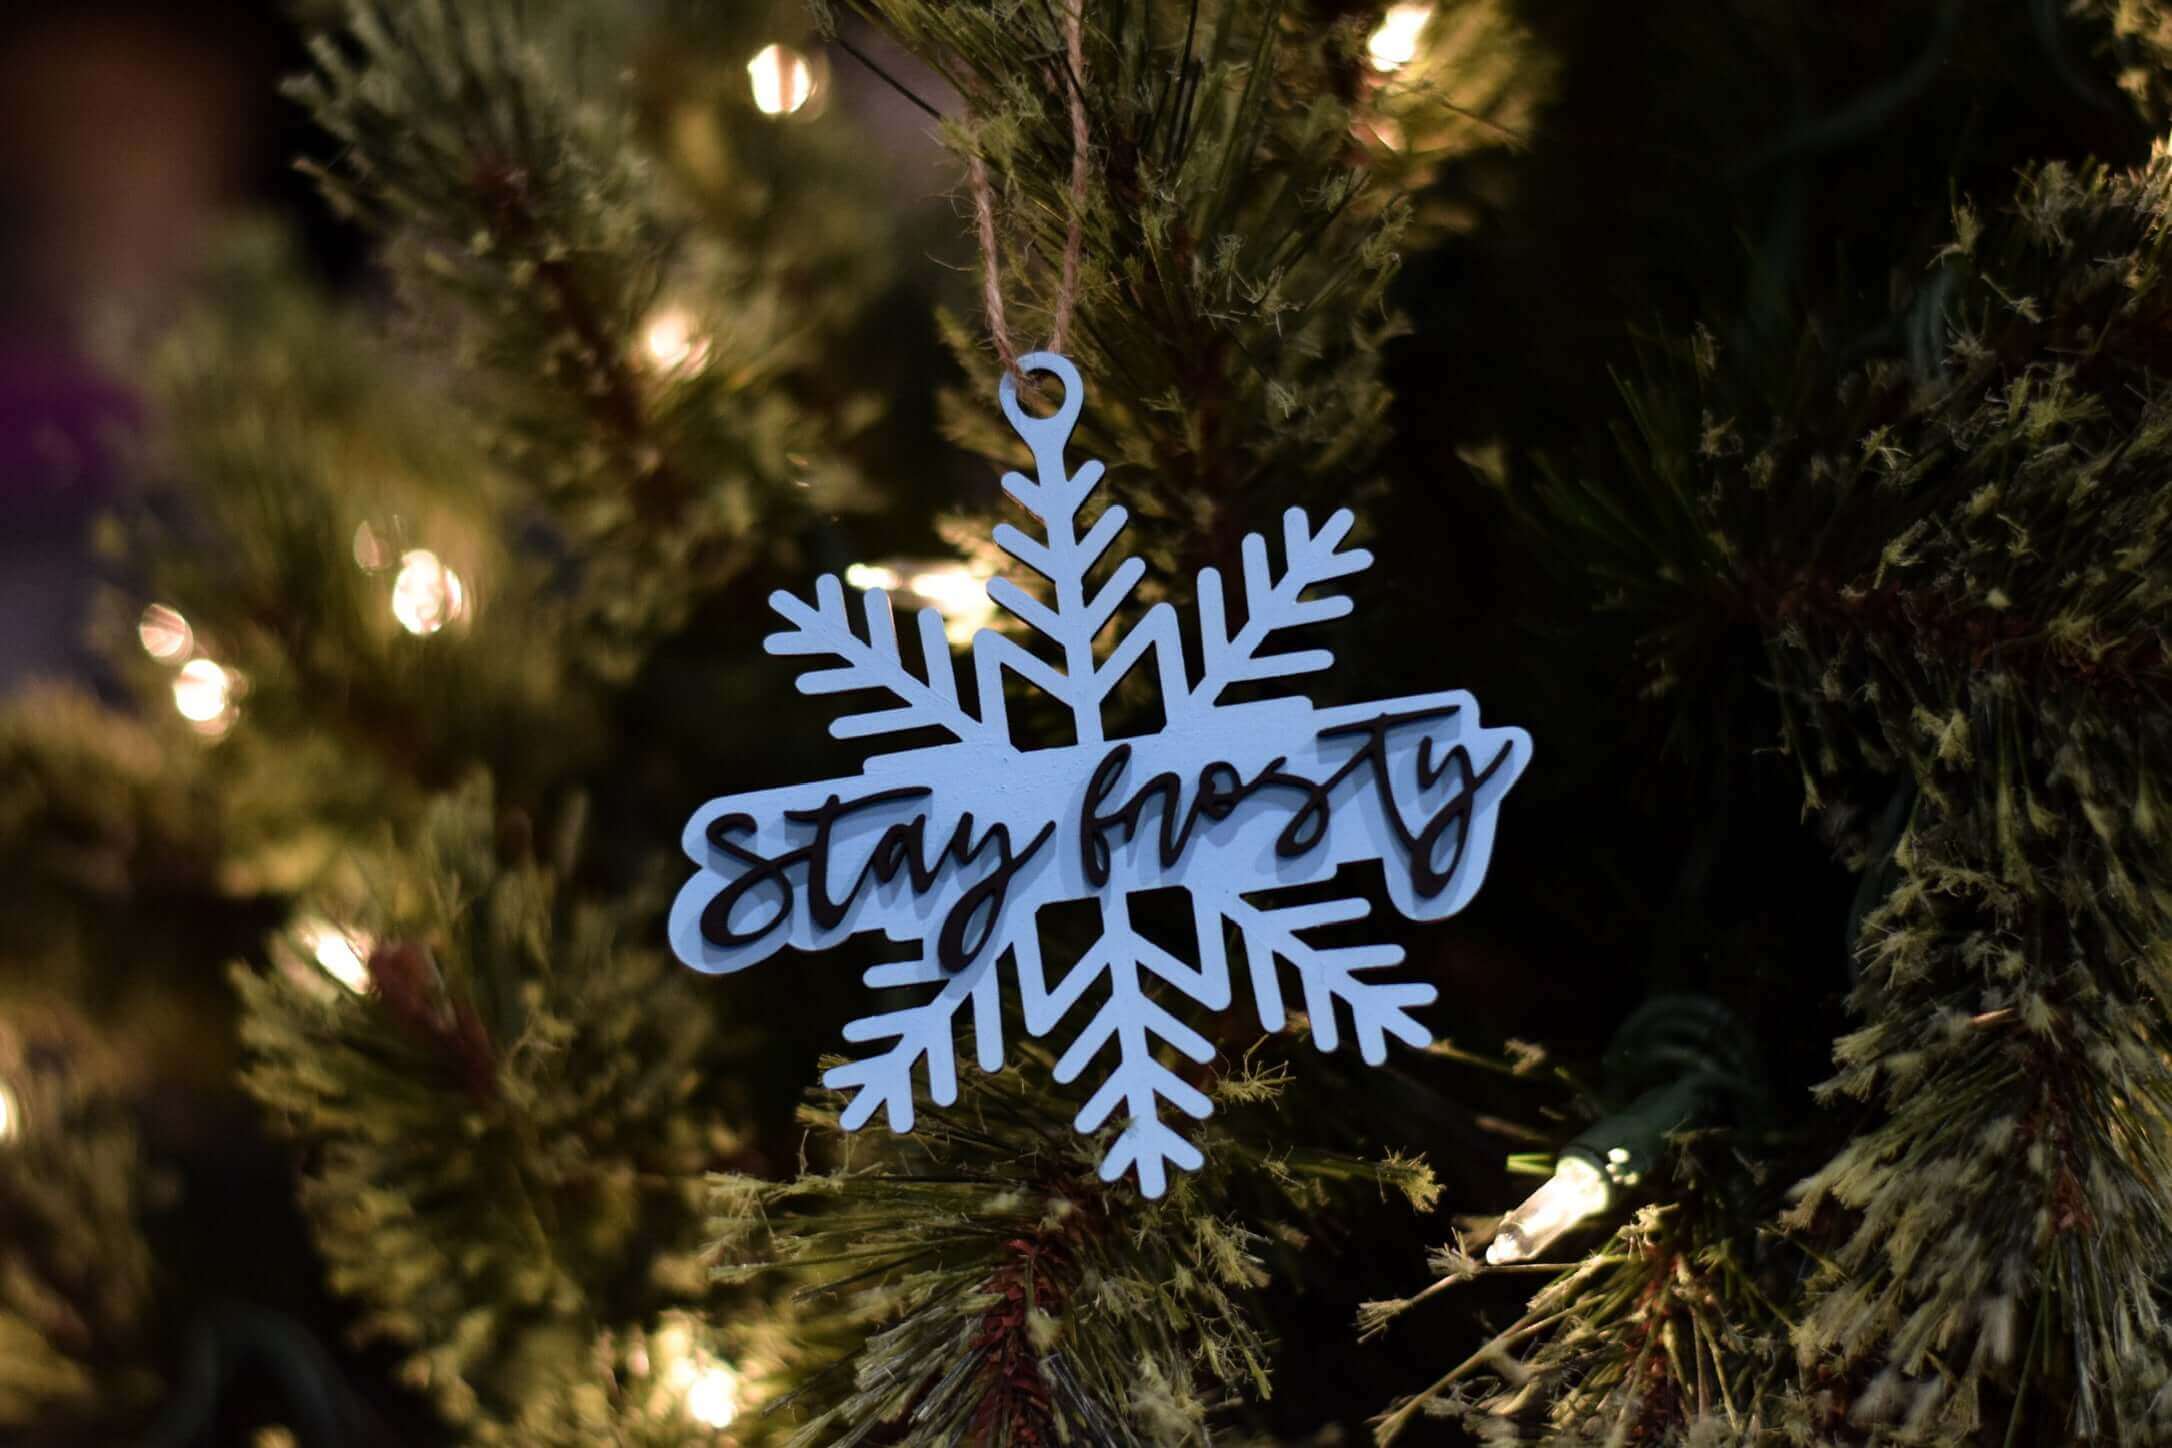 Stay Frosty Christmas Ornament